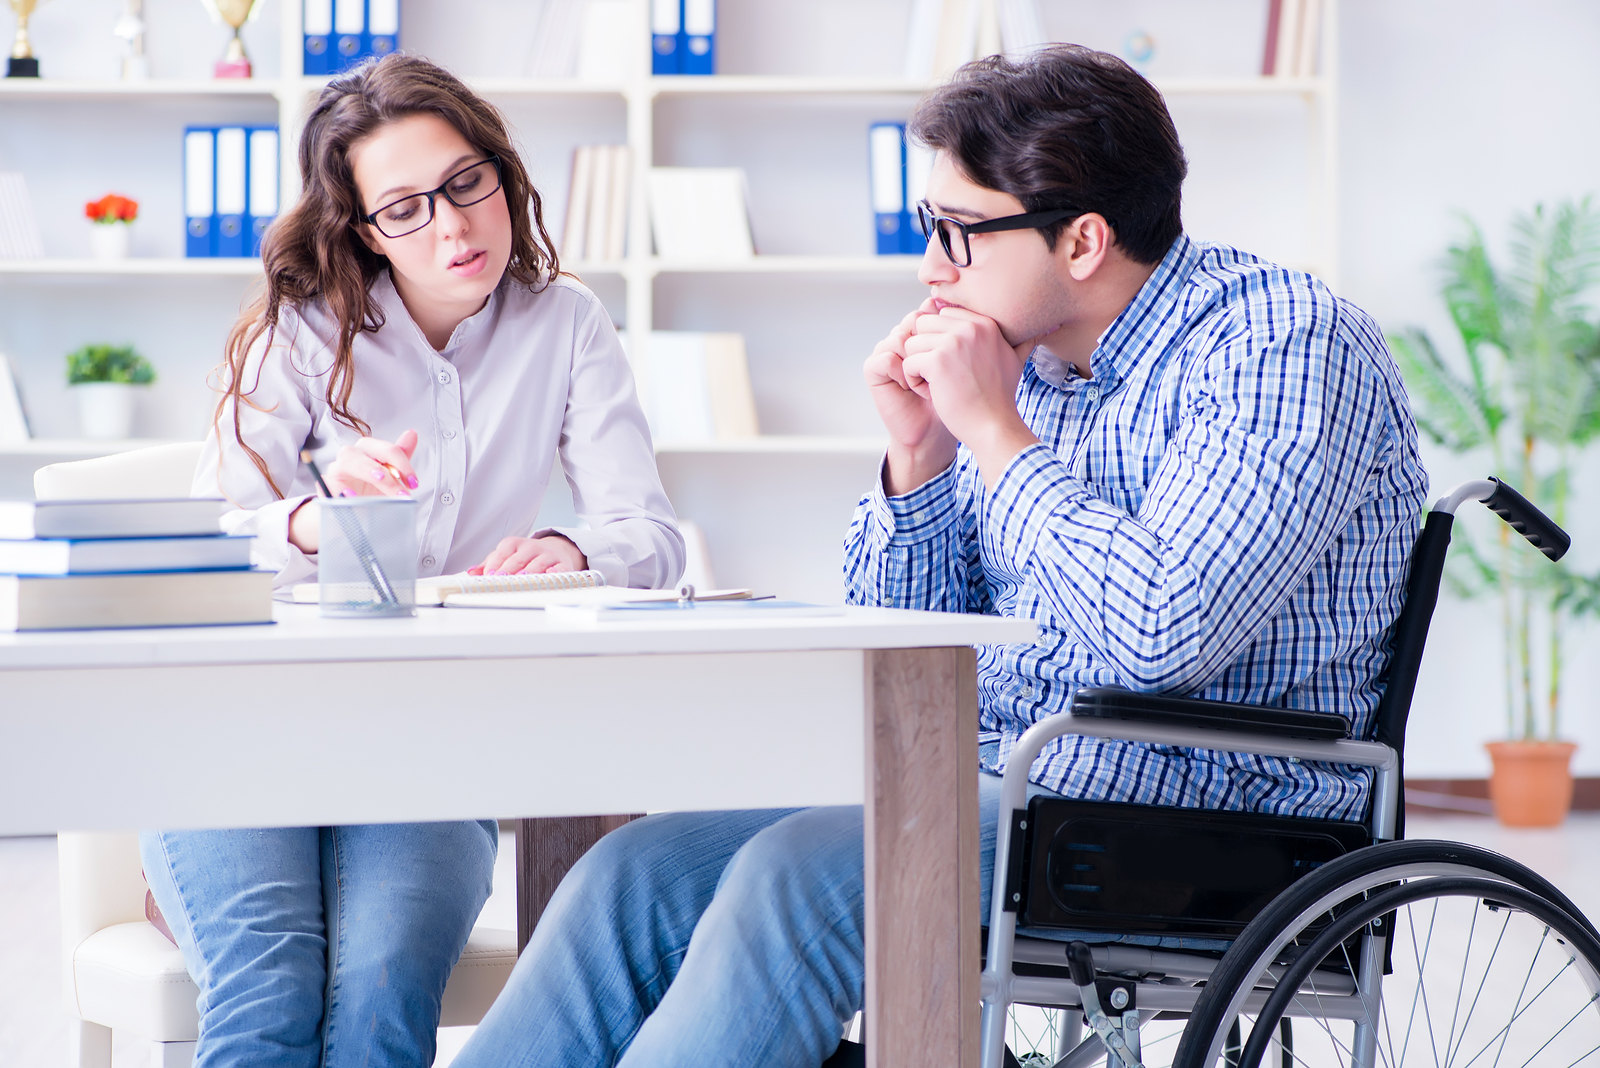 Image presenting a man on a wheelchair studying with his peer.